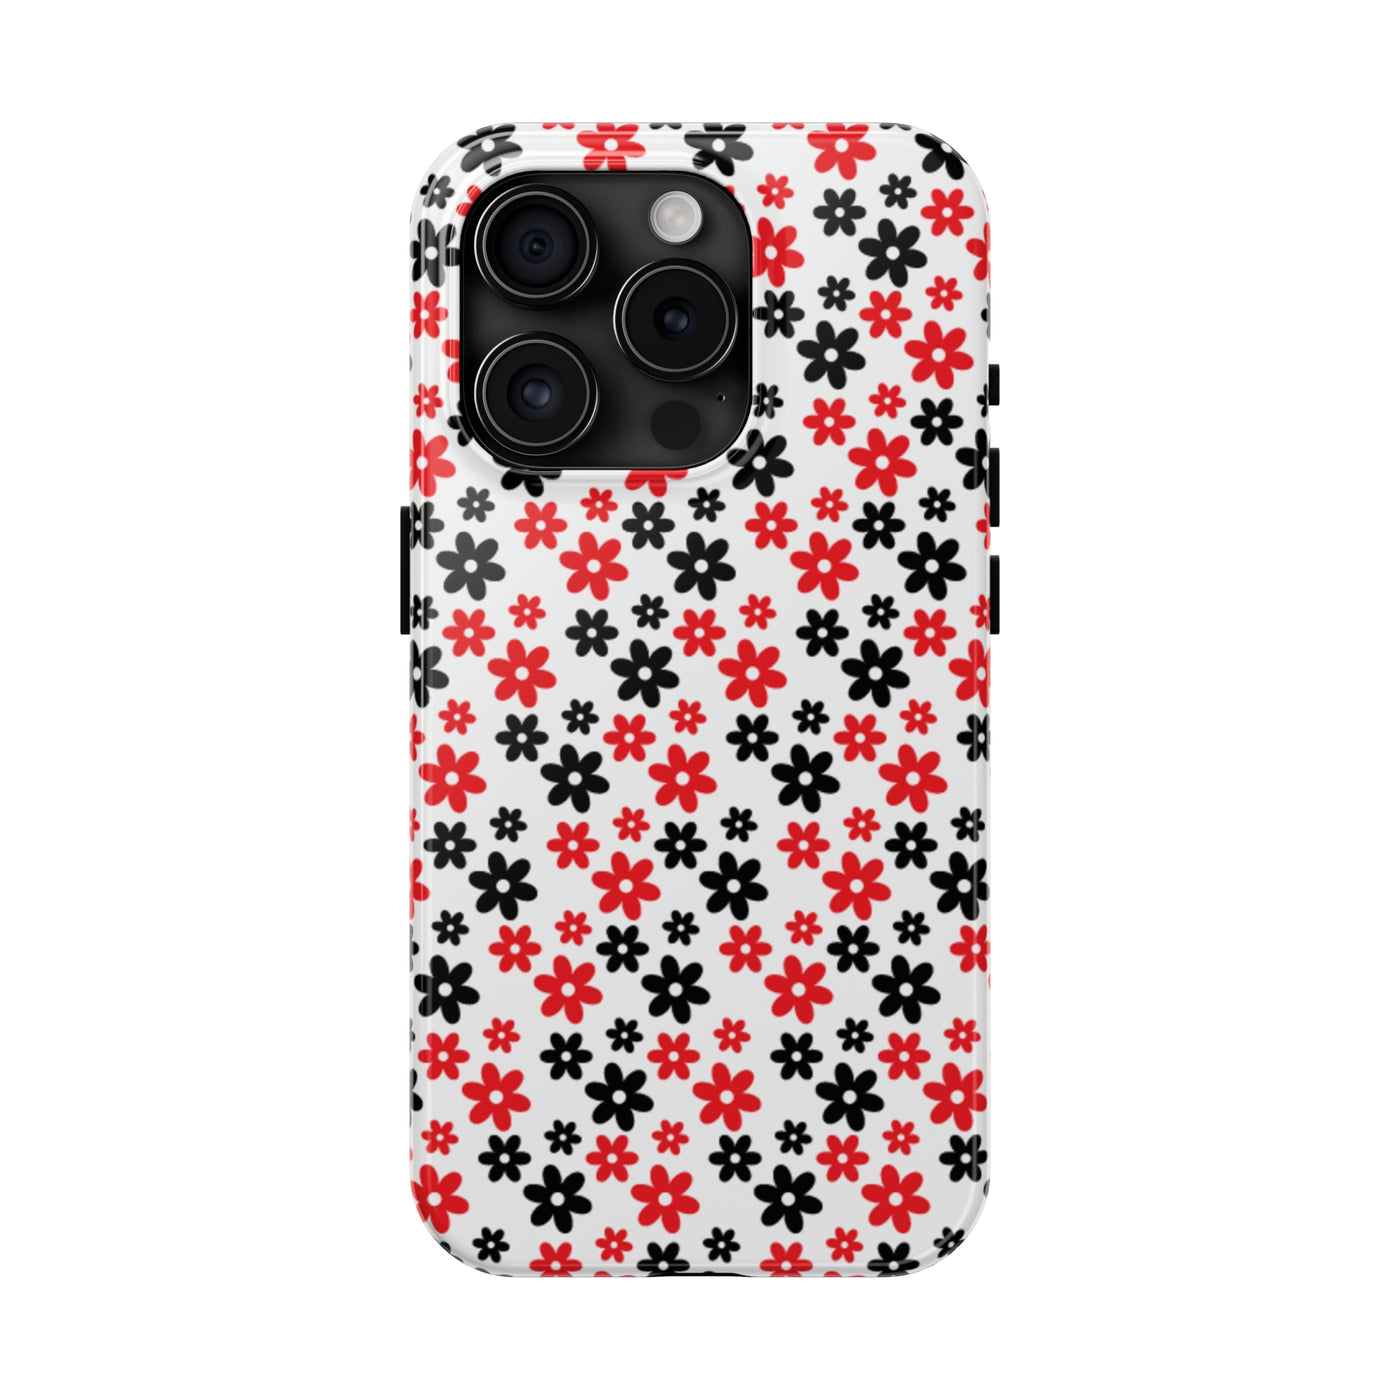 Daisy Flower Iphone Case, Custom phone cases, phone case Inspo, trending phone cases 2023, trending phone cases, aesthetic phone case, bow phone case, phone case ideas, phone case aesthetic, iphone 15 max, Flower phone cover, Red and Black Case